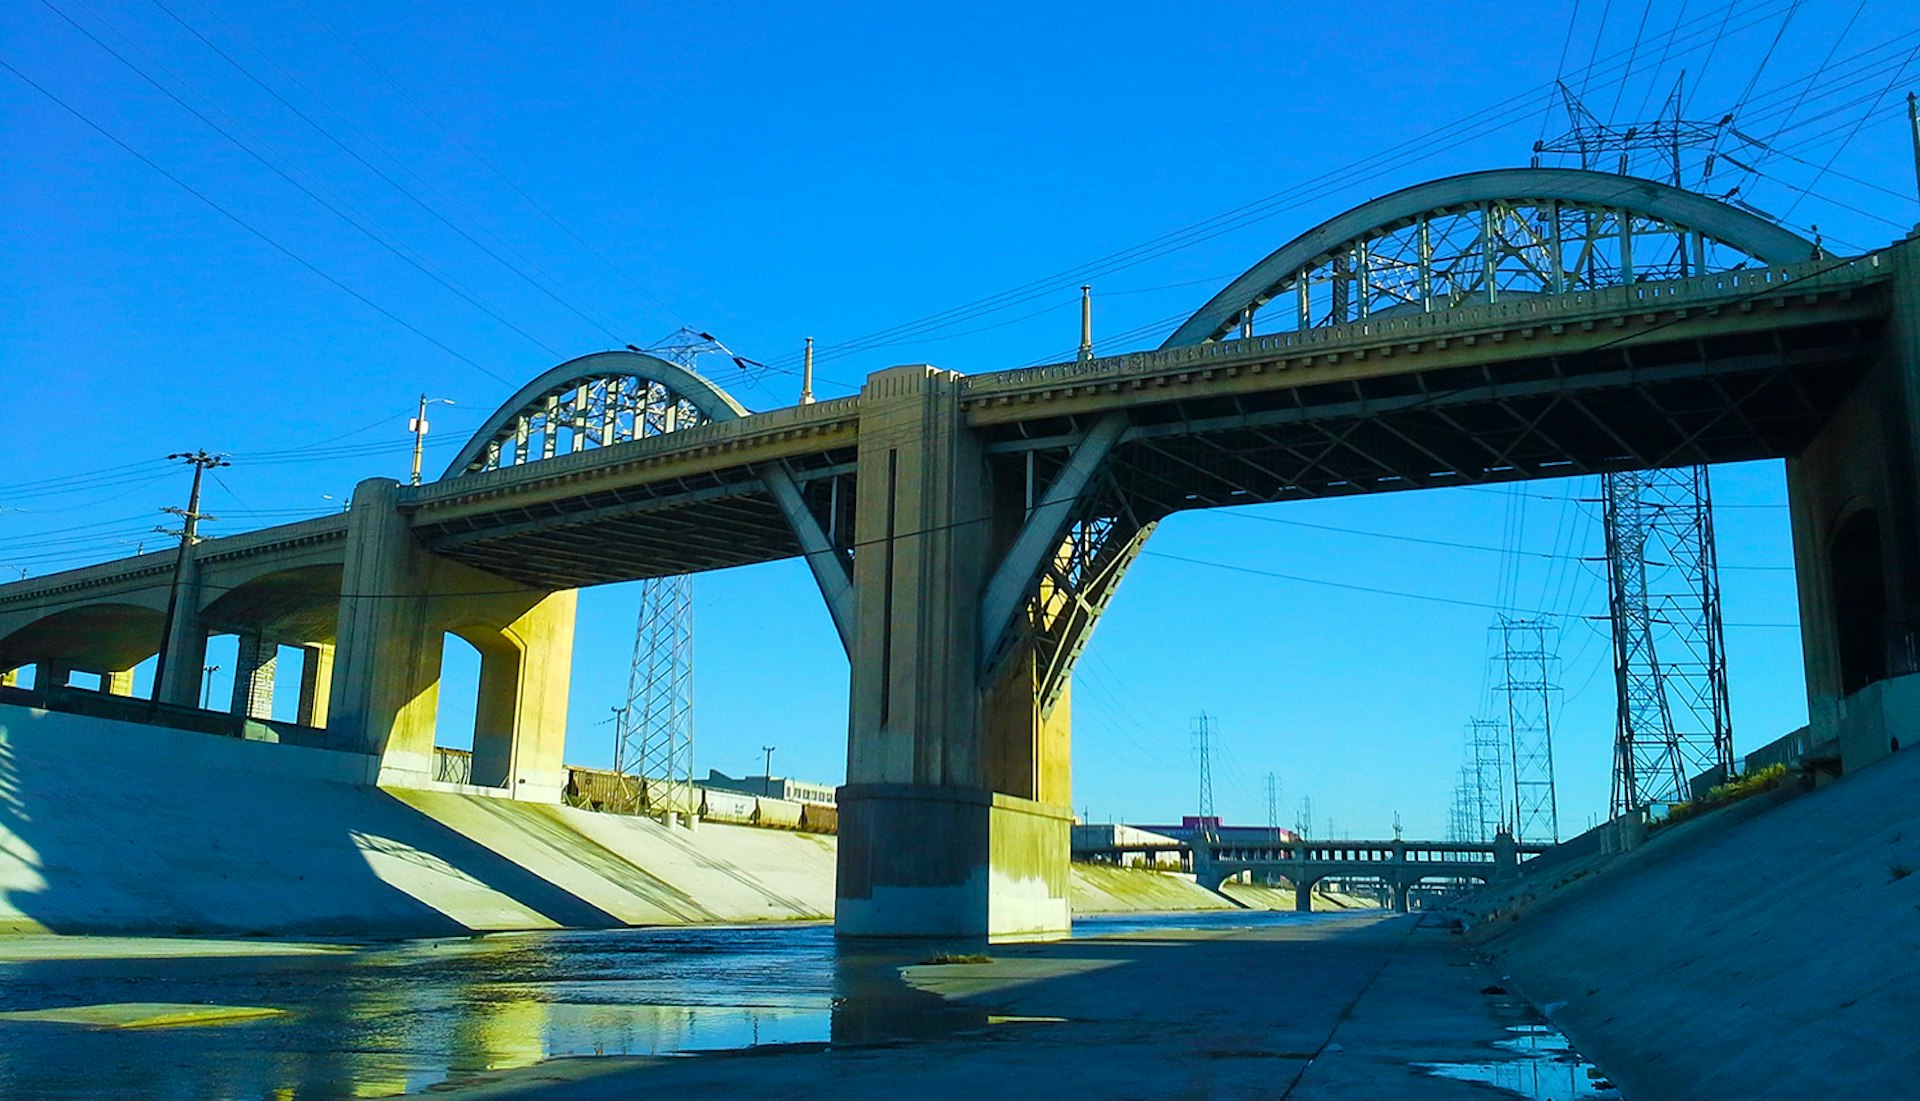 LA’s 6th Street Viaduct was the bridge you never knew you loved